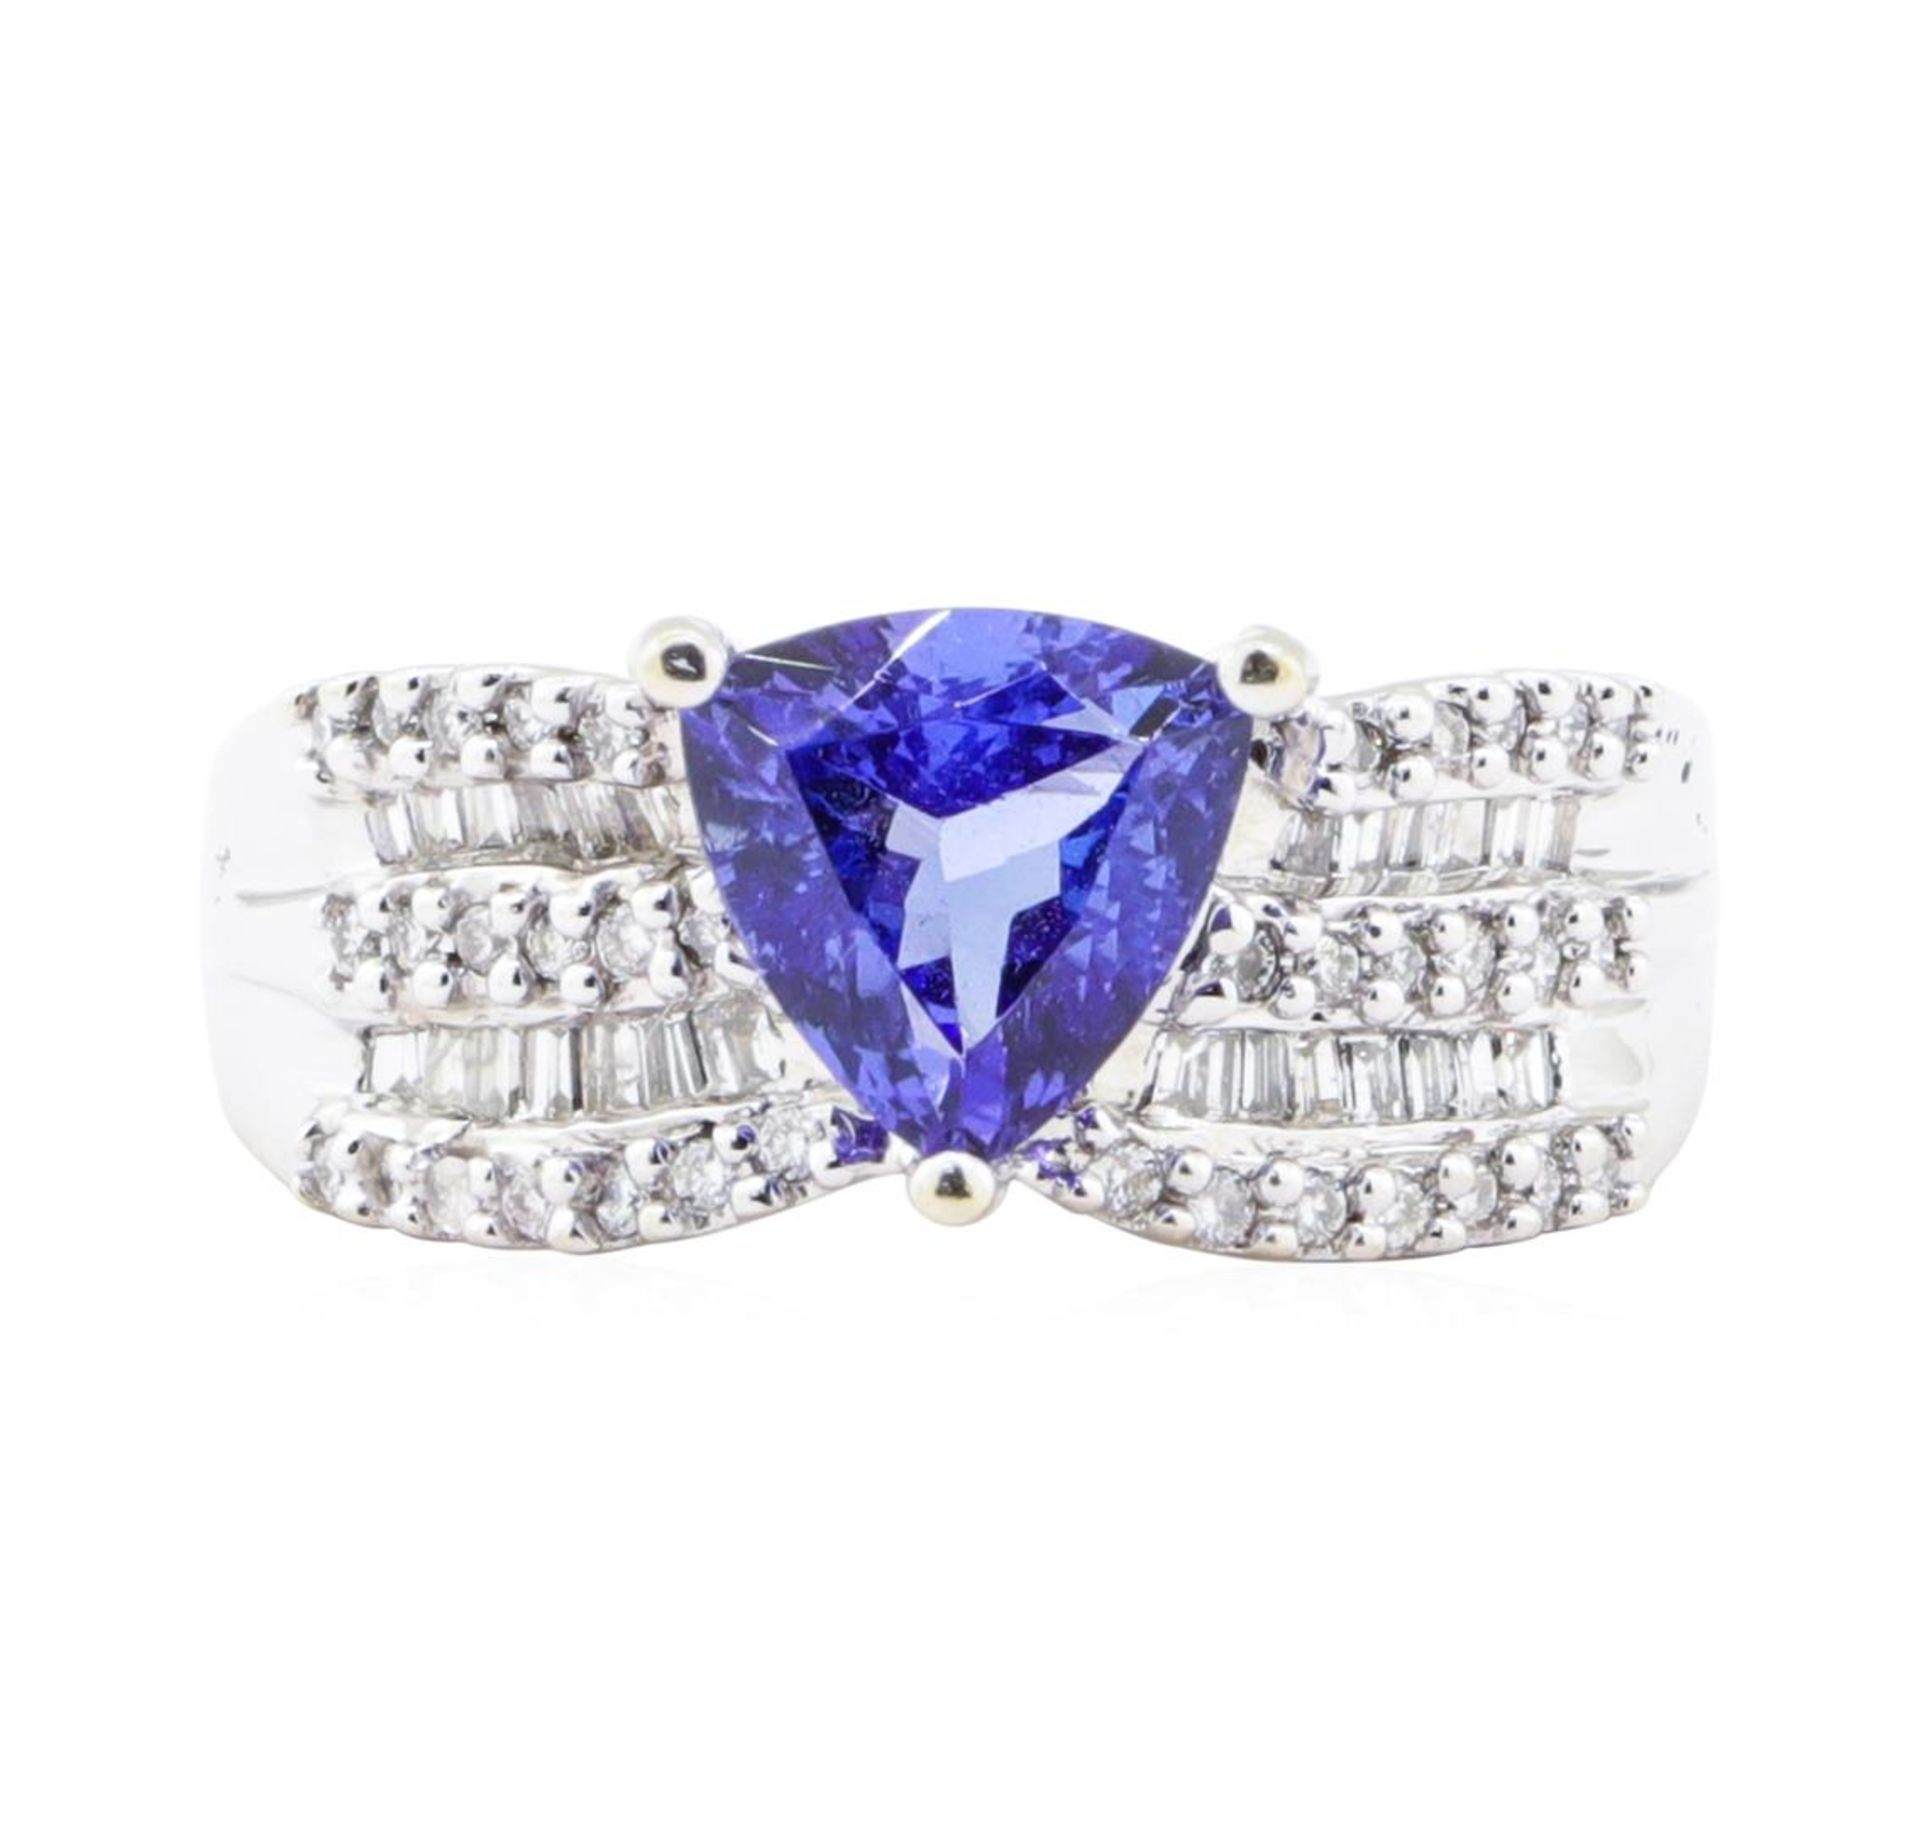 2.54 ctw Tanzanite And Diamond Wide Band - 14KT White Gold - Image 2 of 5